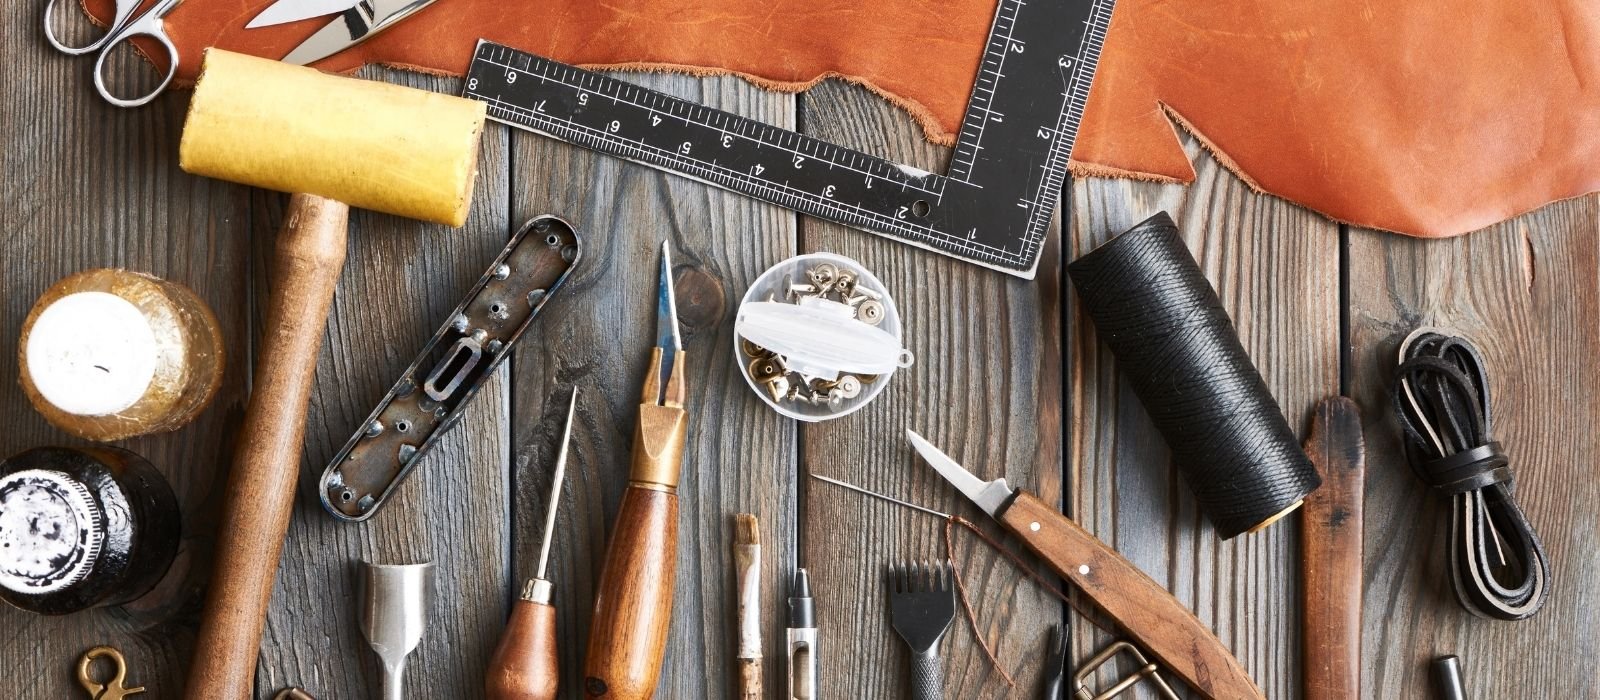 What Every Leather Crafter Needs: Crafting Tools